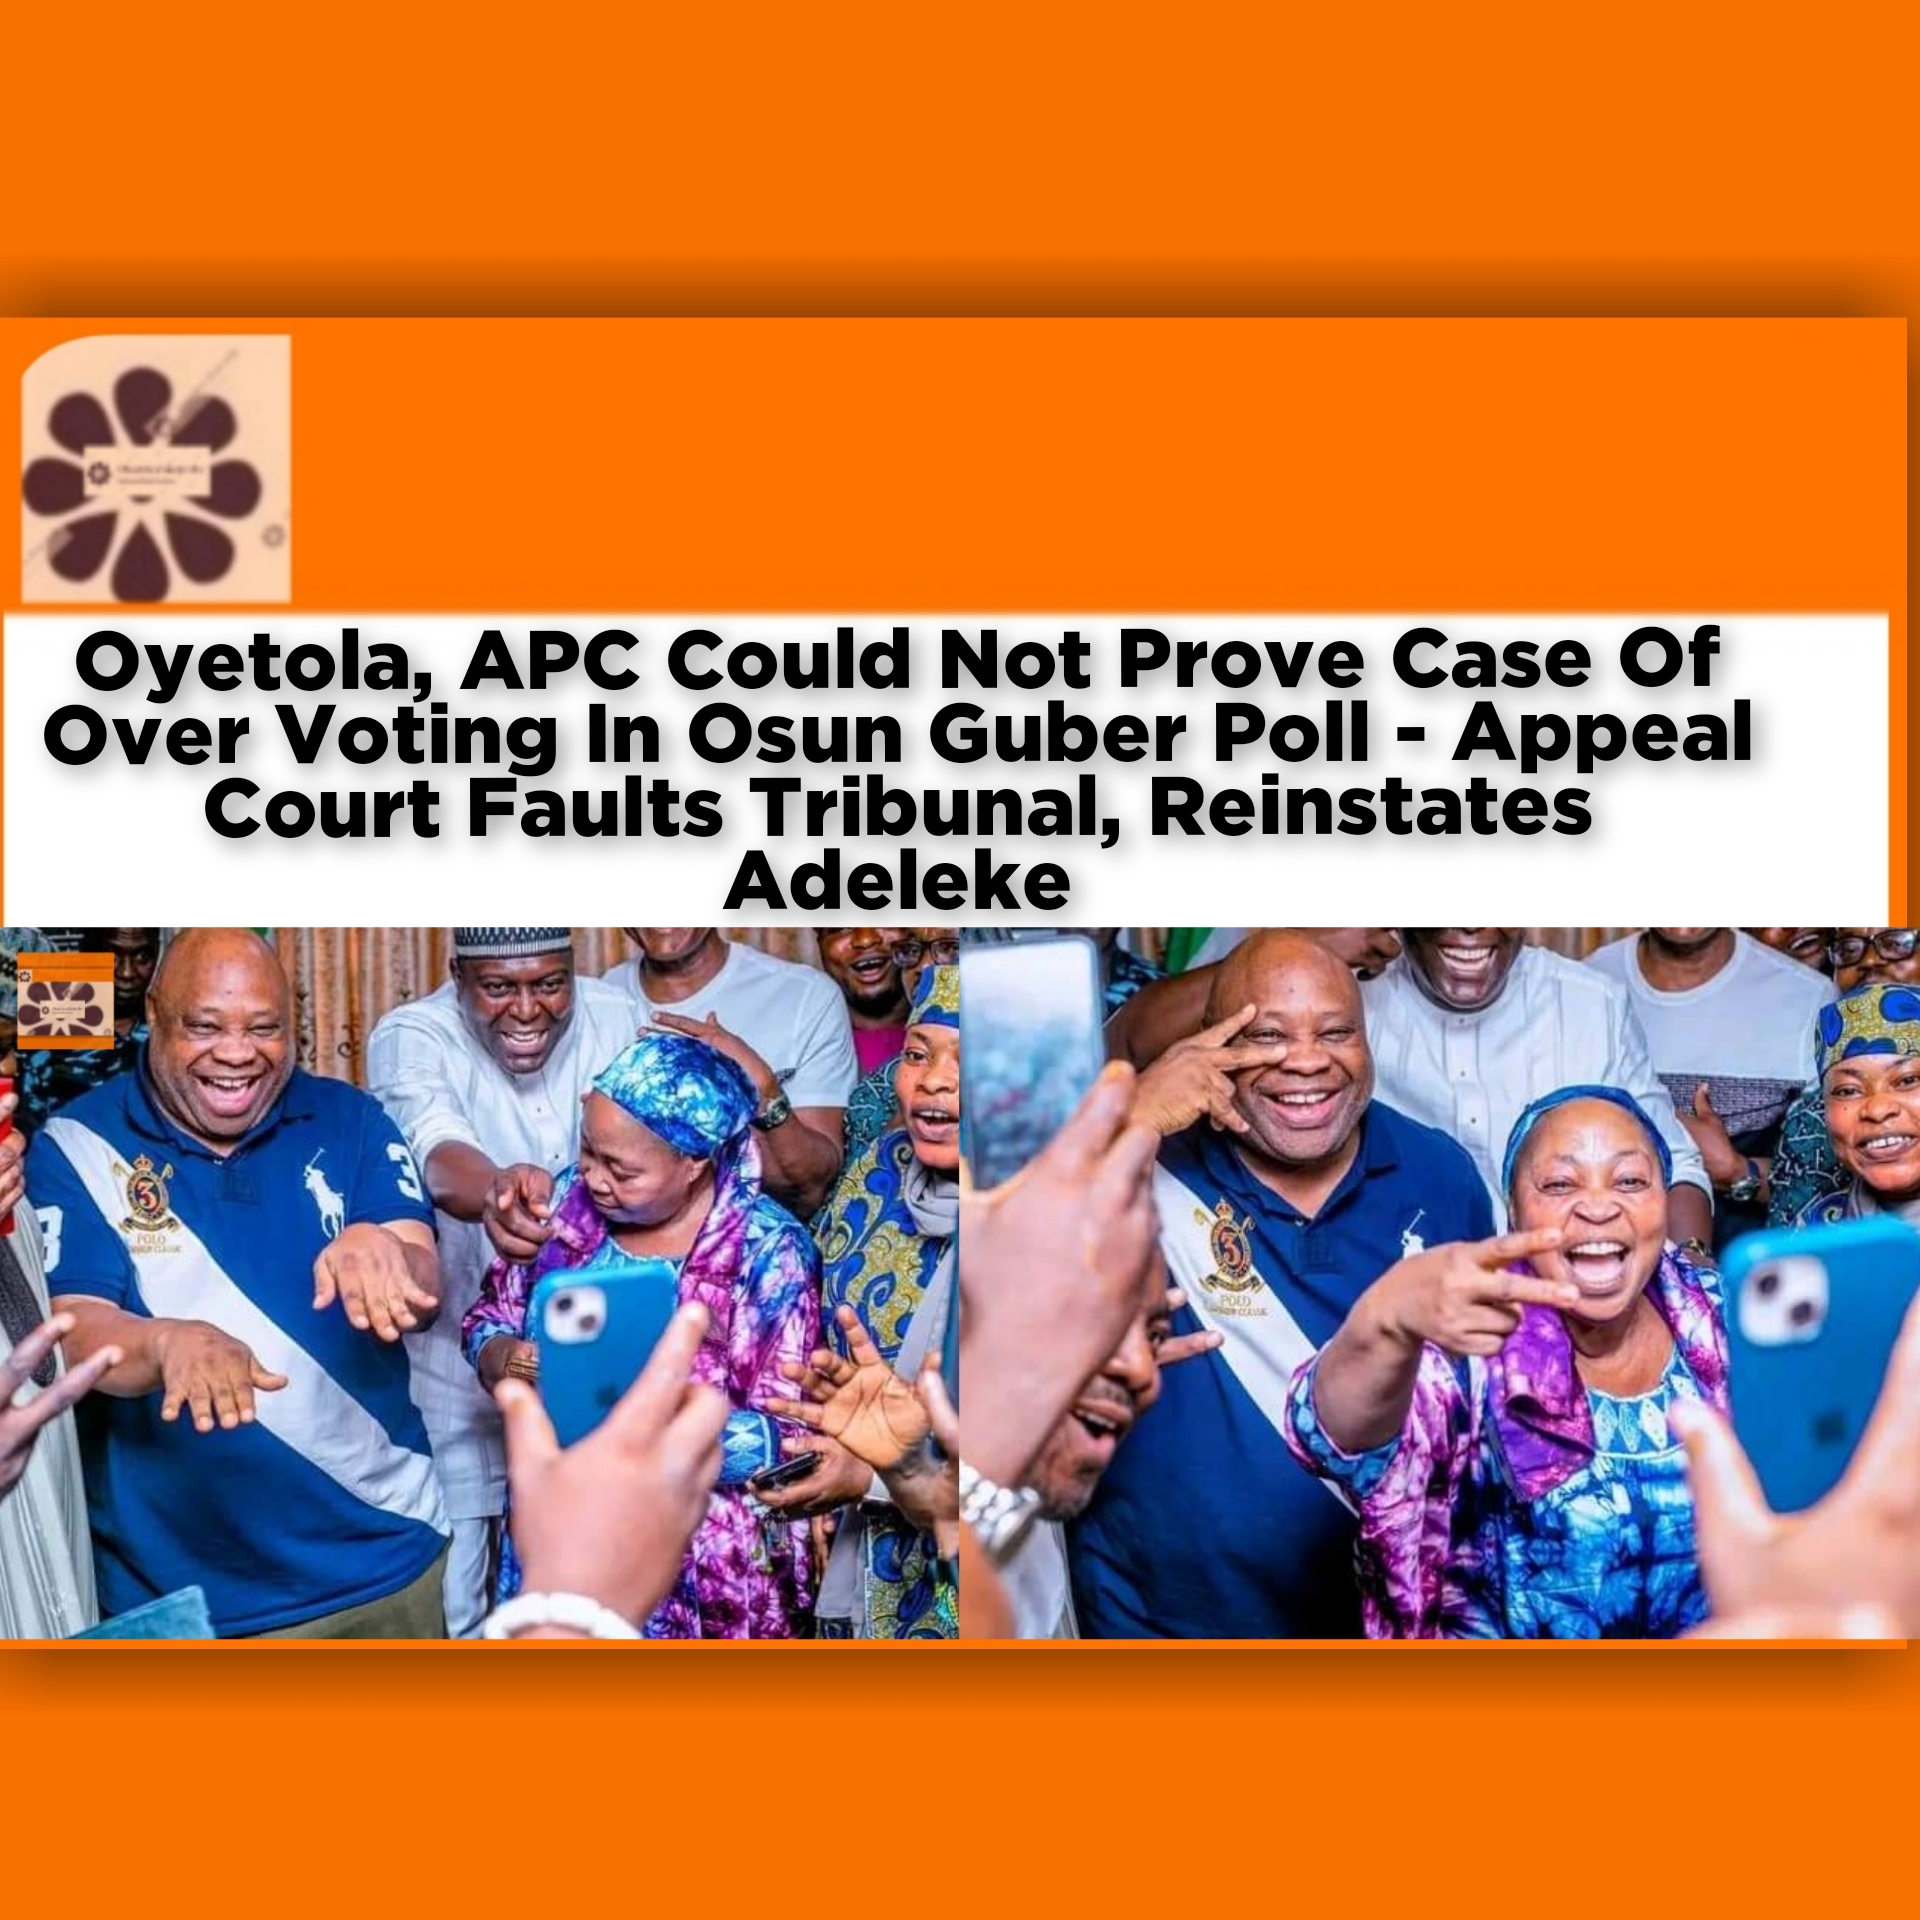 Oyetola, APC Could Not Prove Case Of Over Voting In Osun Guber Poll - Appeal Court Faults Tribunal, Reinstates Adeleke ~ OsazuwaAkonedo #politics